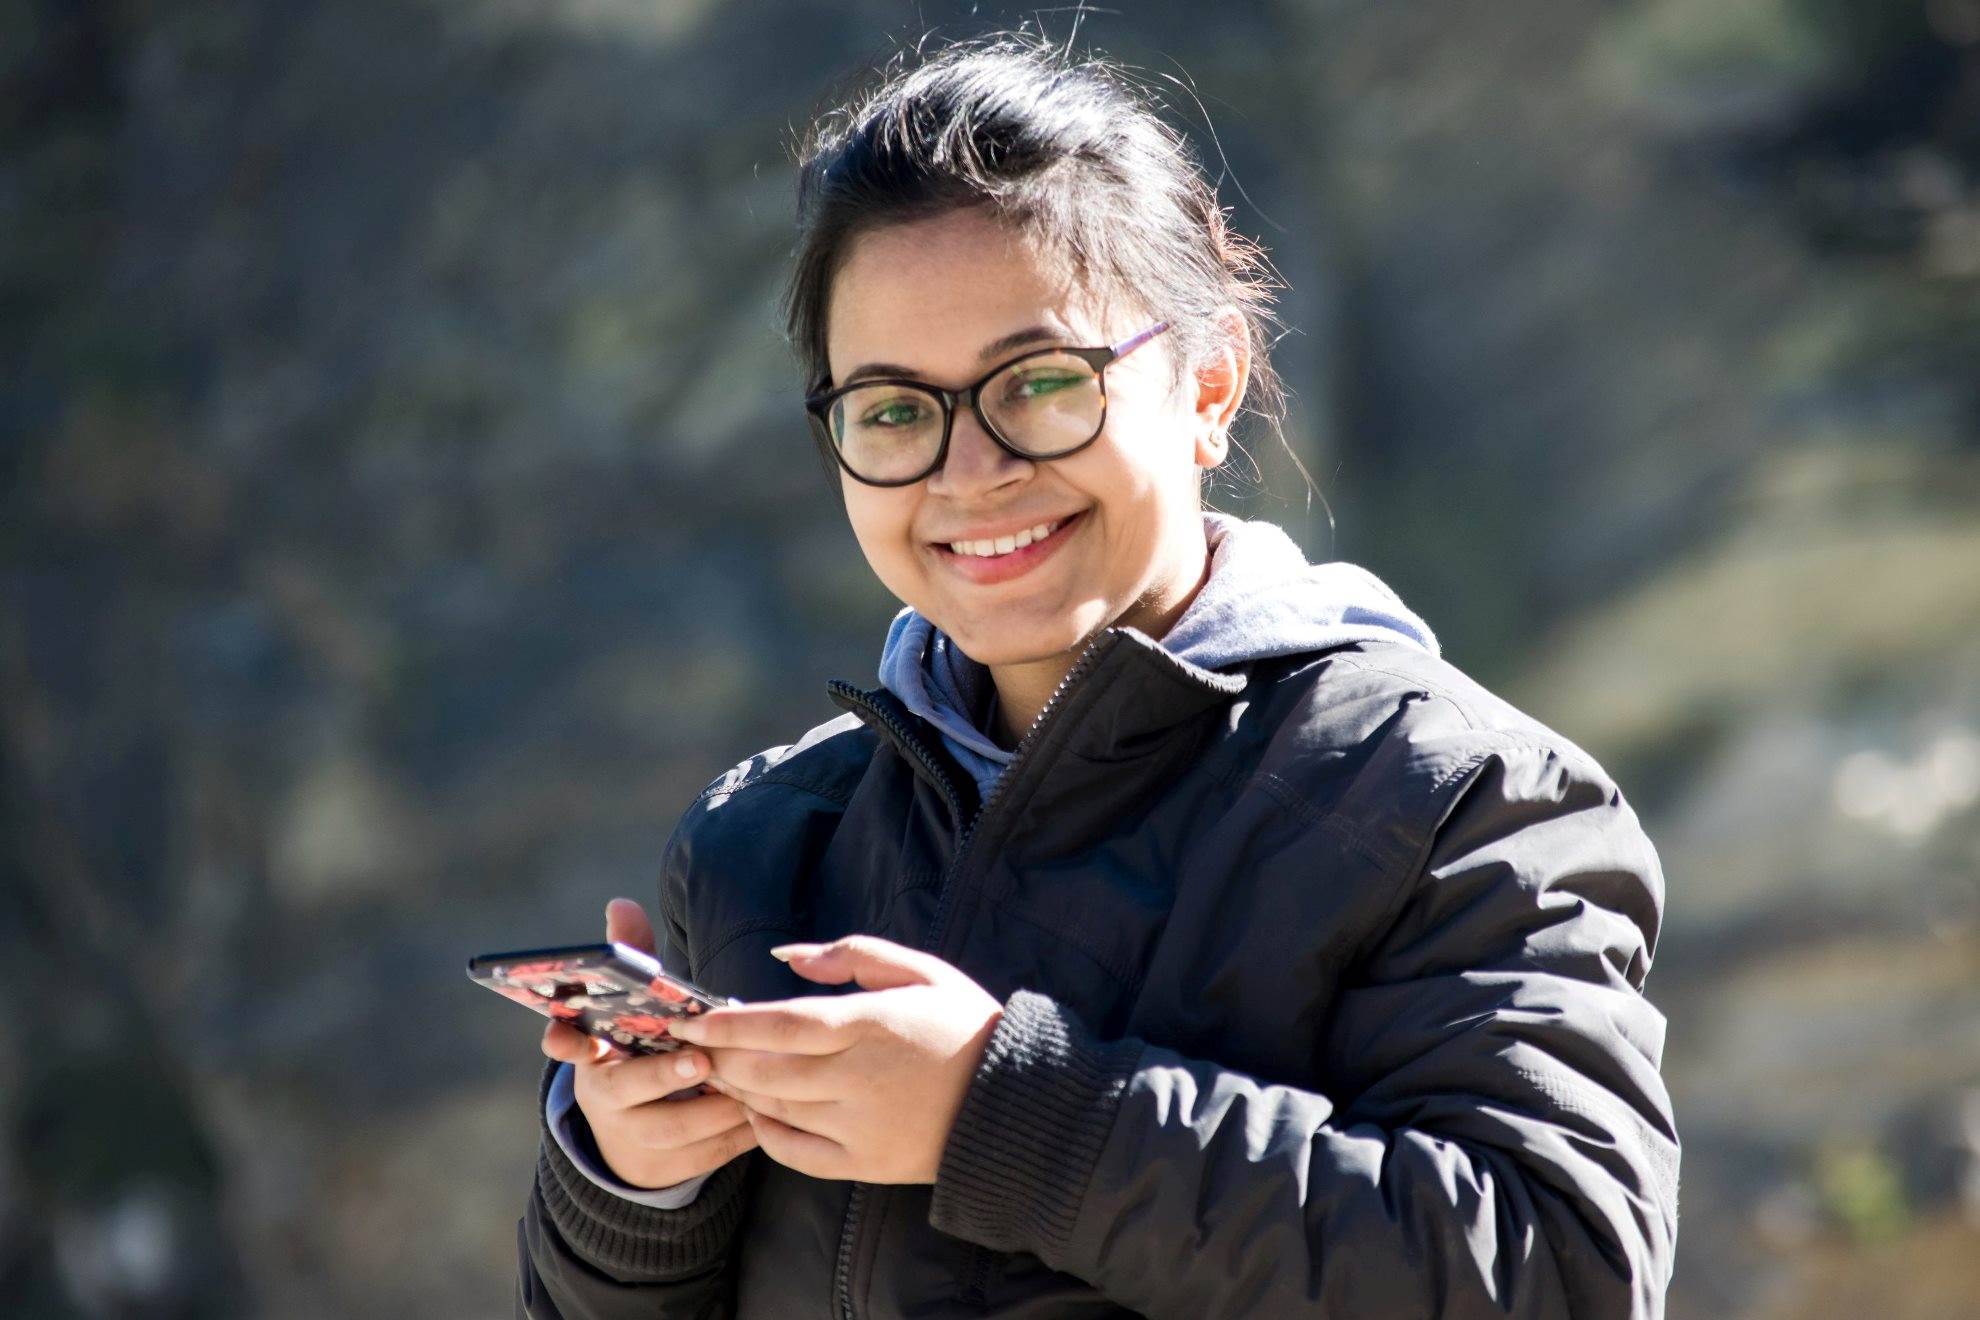 Person on smartphone smiling at camera